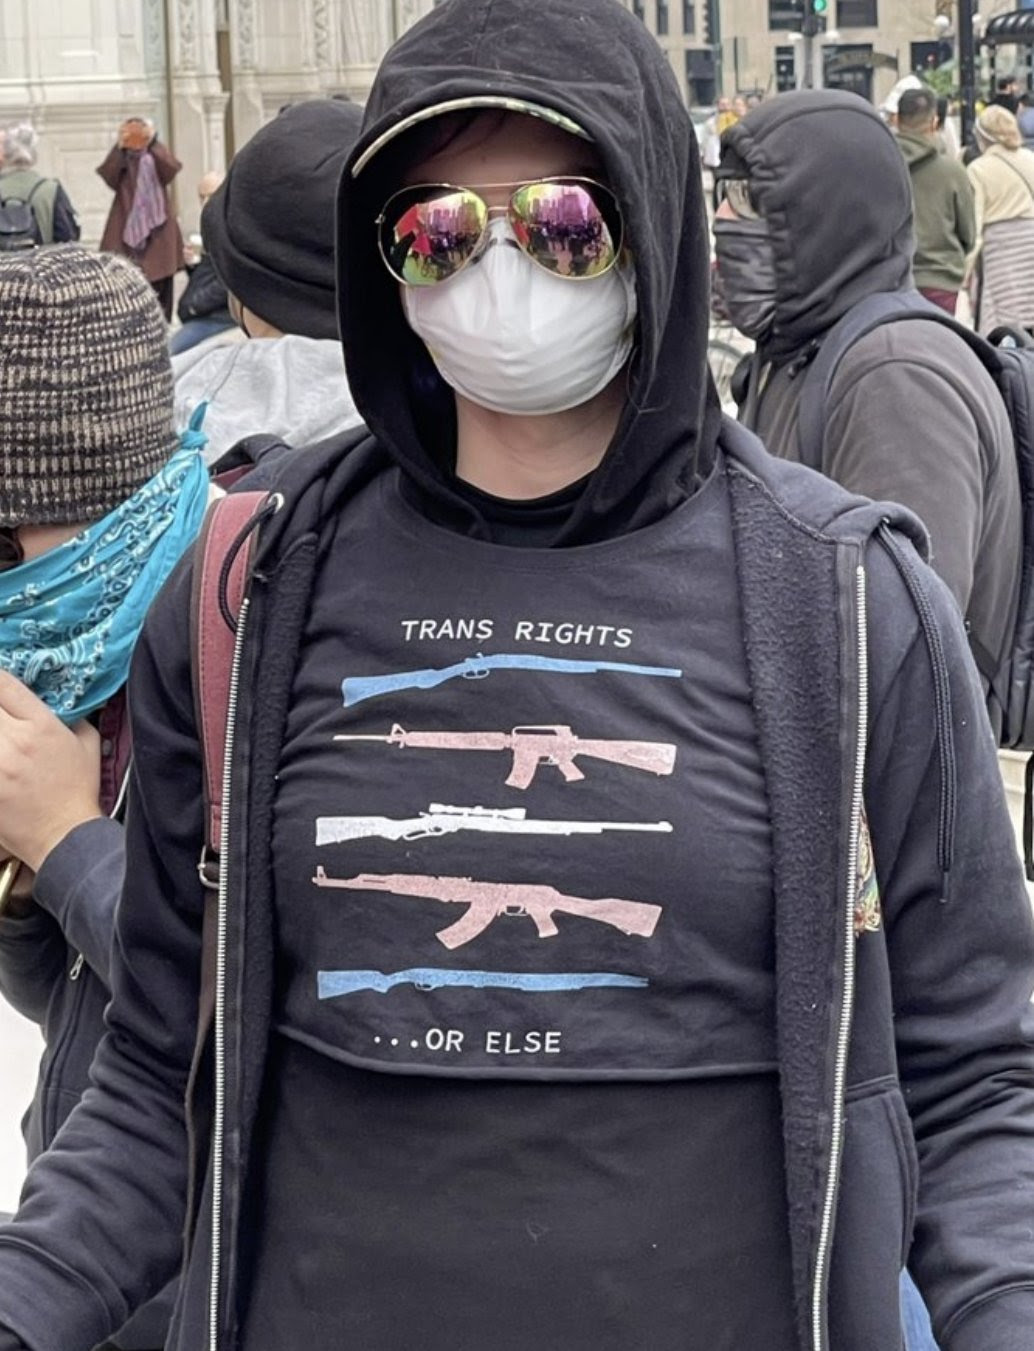 Trans activit wearing popular T-shirt that says "Trans Right or Else# showing 5 assault rifles.